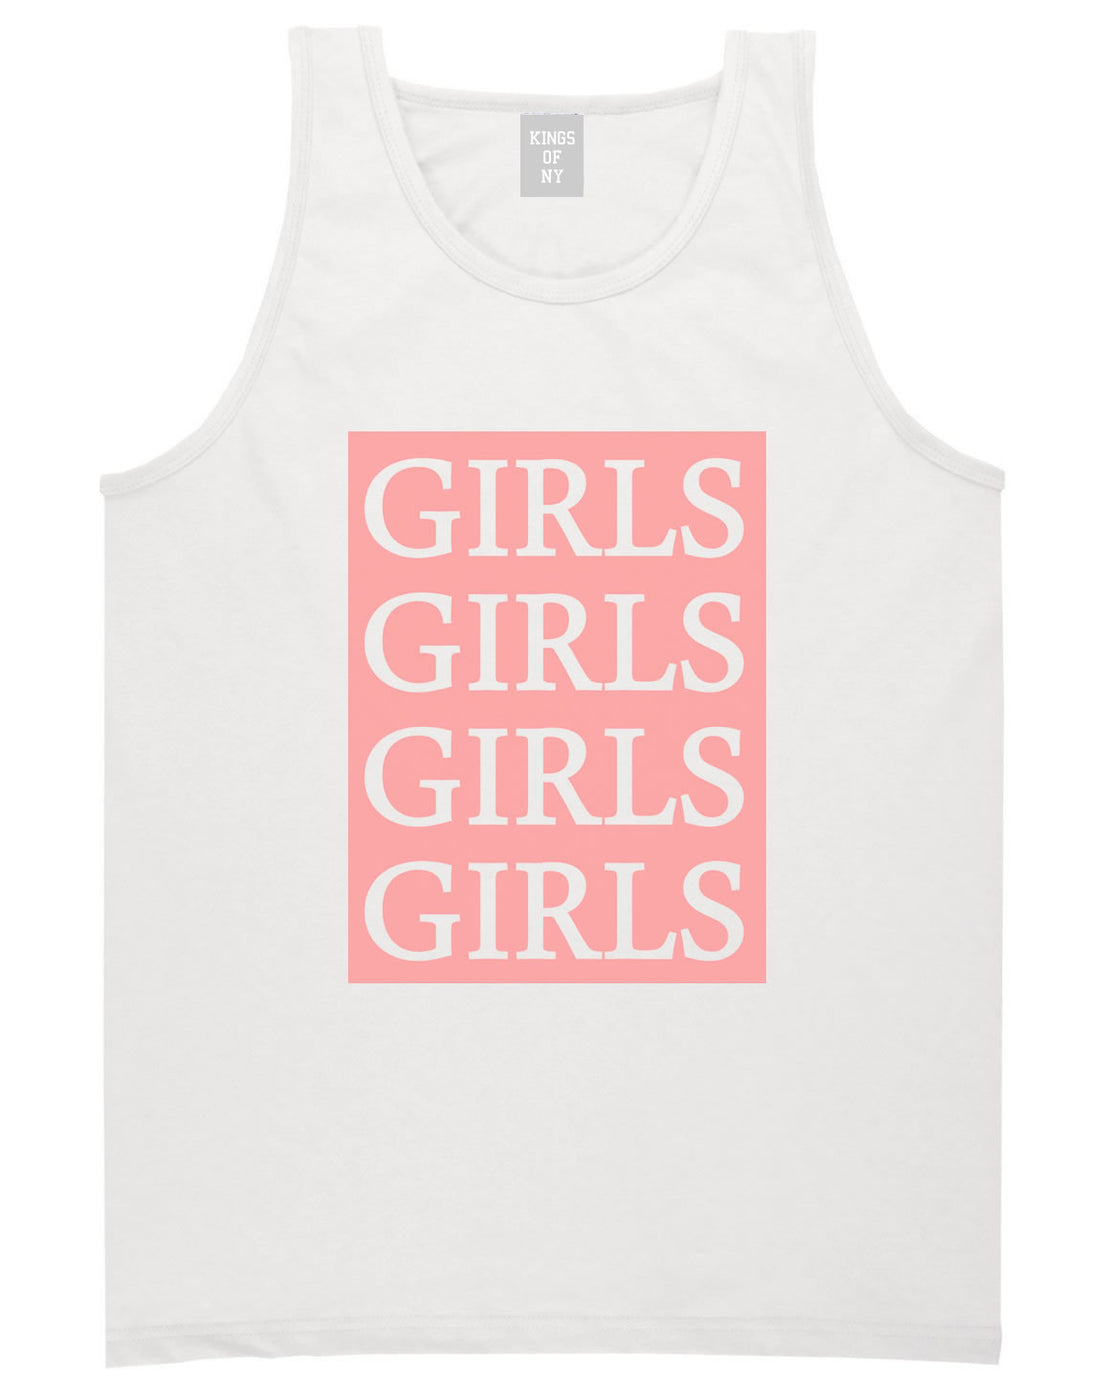 Girls Girls Girls Tank Top in White by Kings Of NY